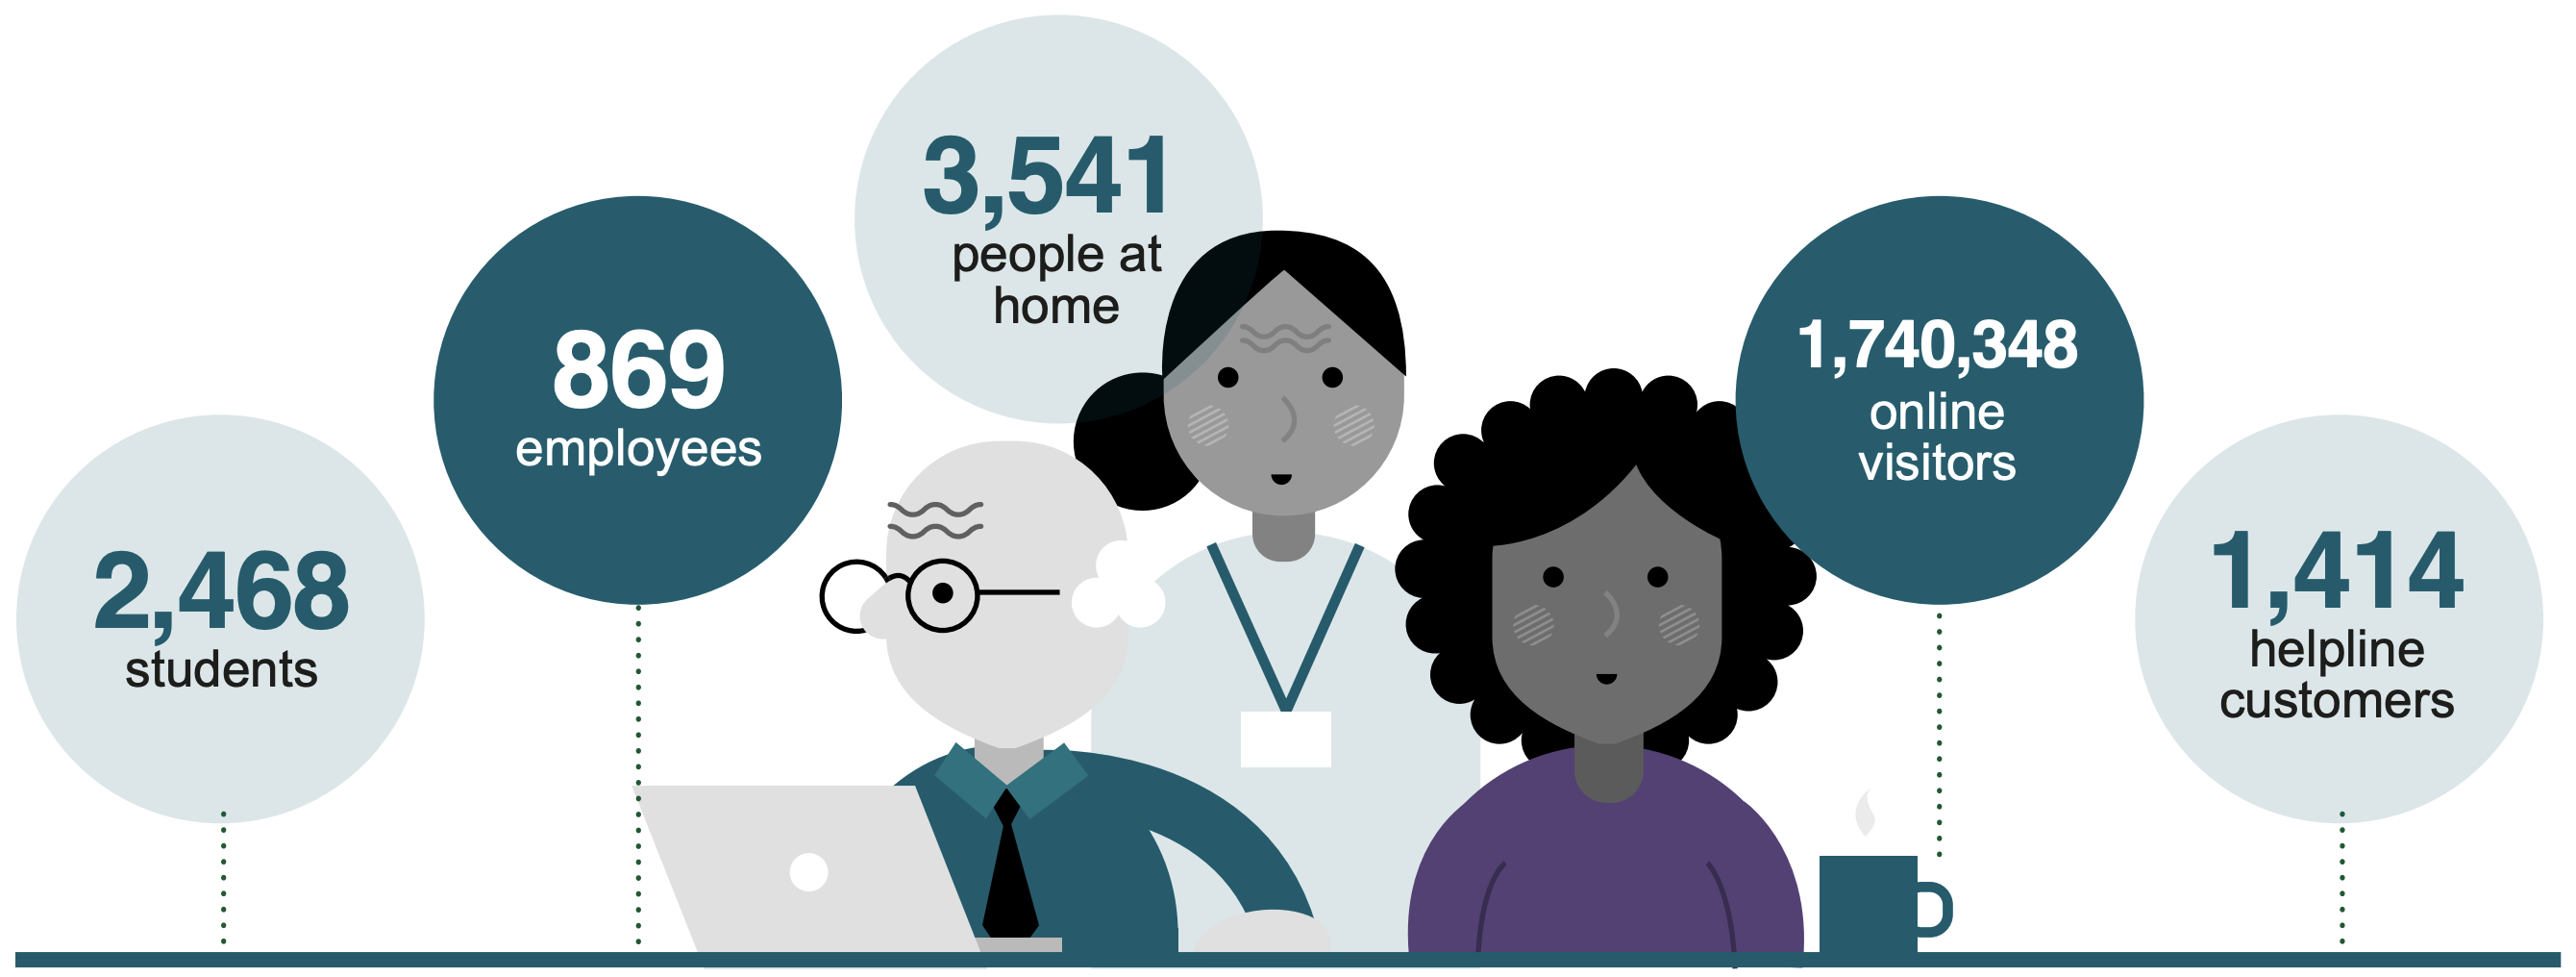 In 2020 we helped 2,468 students, 869 employees, 3,541 people at home, 1,414 helpline customers and 1.7 million online visitors